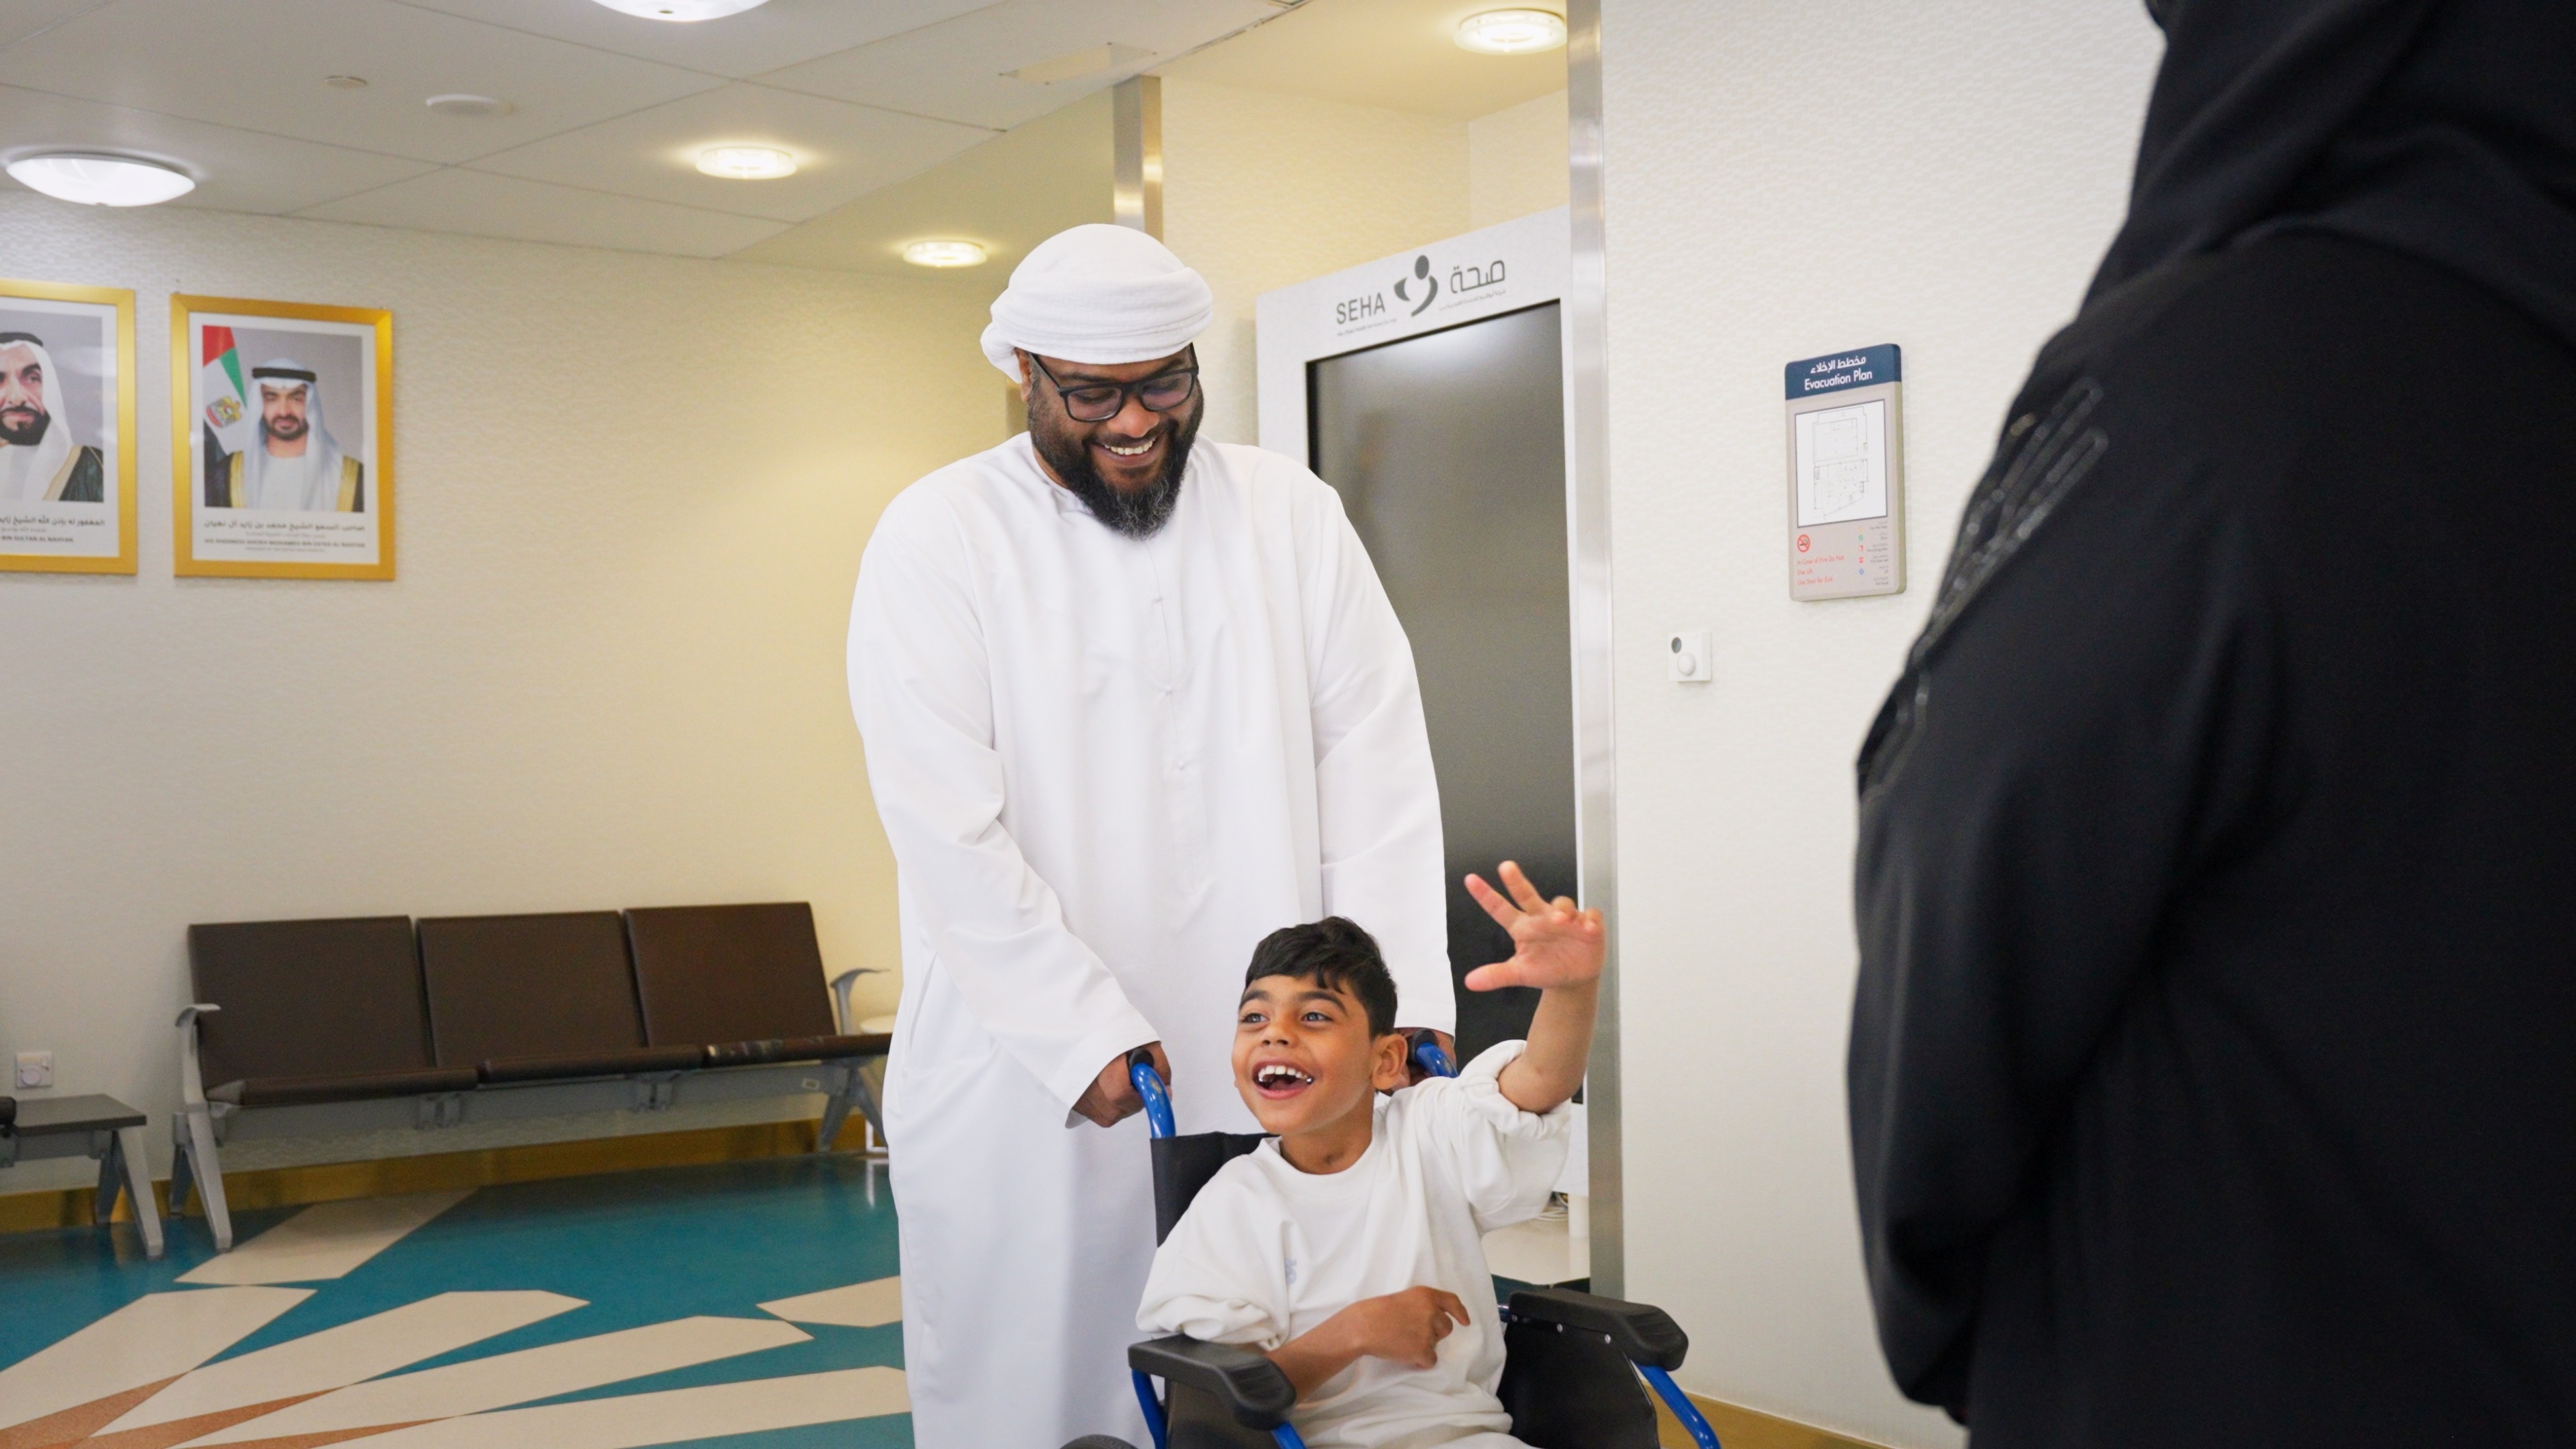 Photo: Eight-year-old Emirati finds voice for first time after undergoing six-month intensive treatment in Abu Dhabi